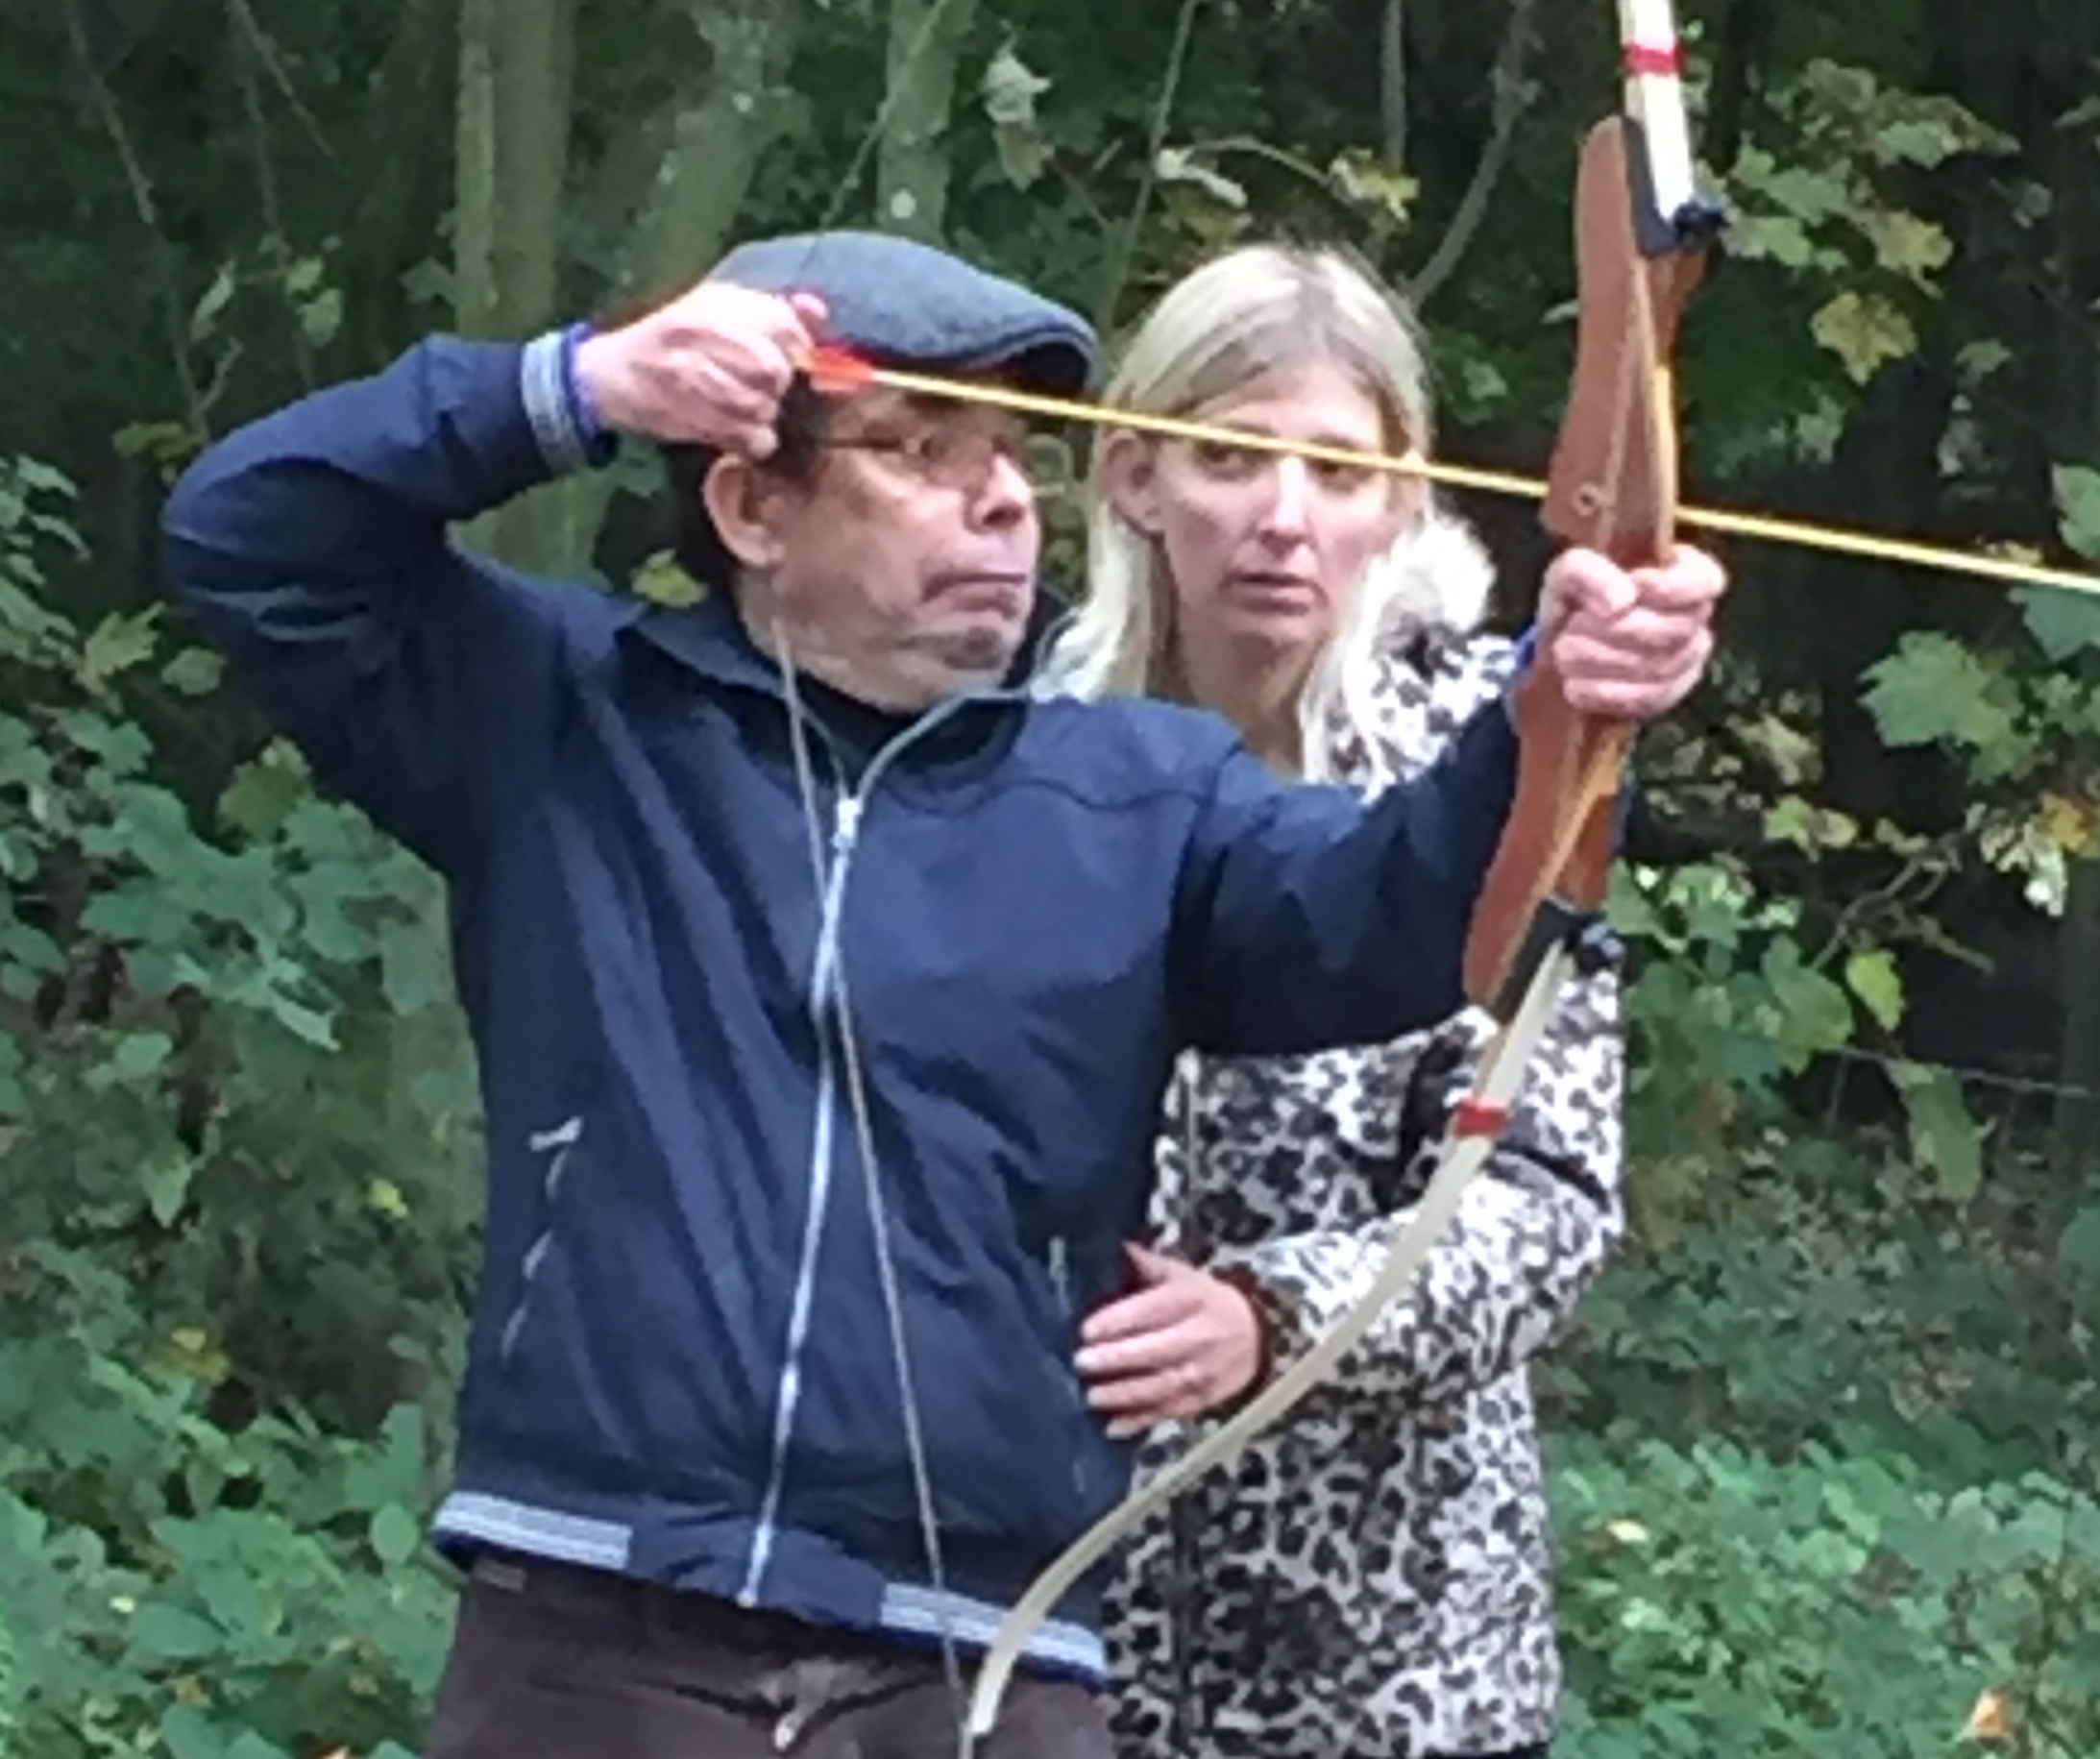 Customer of Surrey Choices trying archery